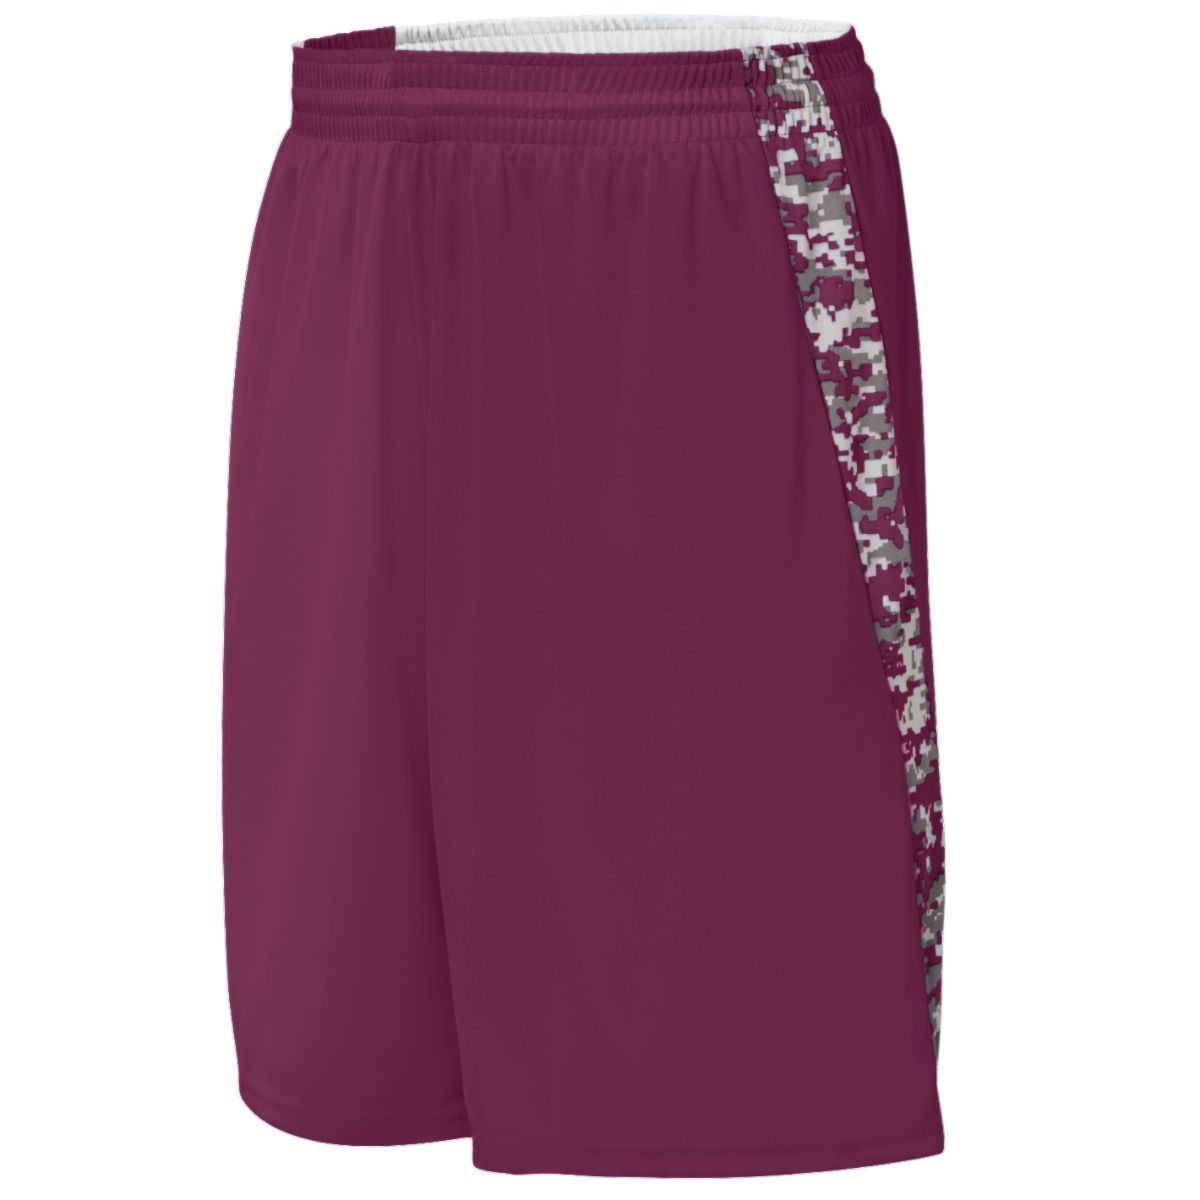 Augusta Sportswear Youth Hook Shot Reversible Shorts in Maroon/Maroon Digi  -Part of the Youth, Youth-Shorts, Augusta-Products, Basketball, All-Sports, All-Sports-1 product lines at KanaleyCreations.com